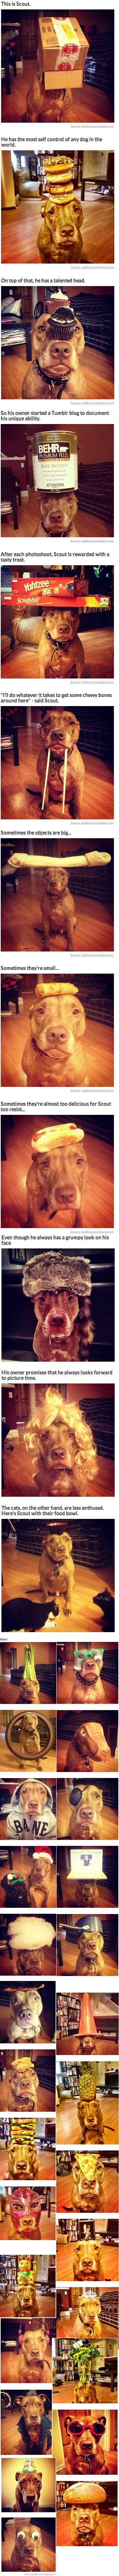 This Dog Can Balance Anything On His Head. You'll Burst Out Laughing Till You Cry At What His Owner Has Tried… LOL! -   Misc